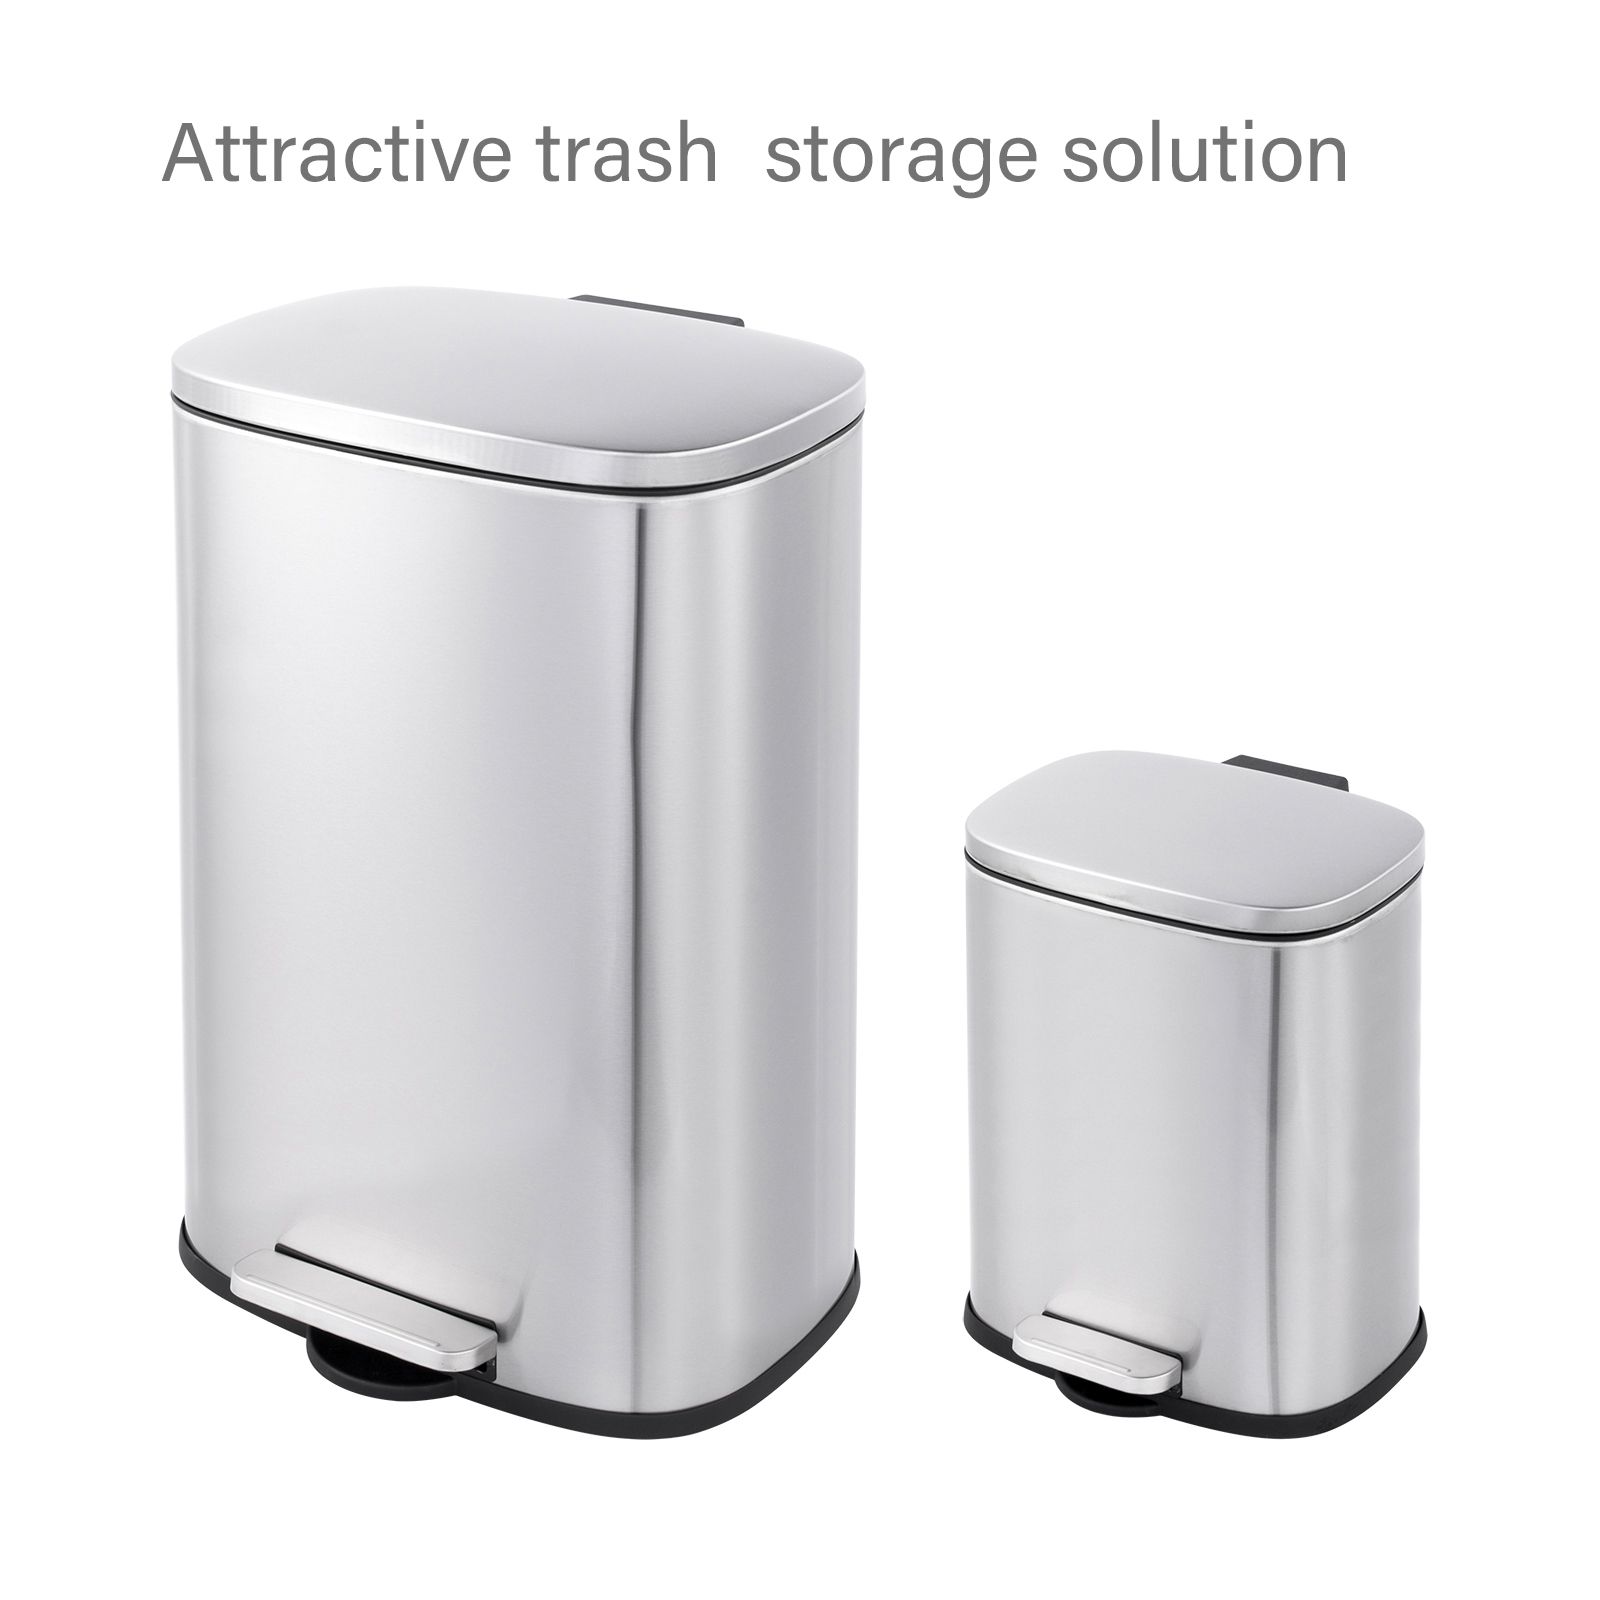 Step-On Trash Cans